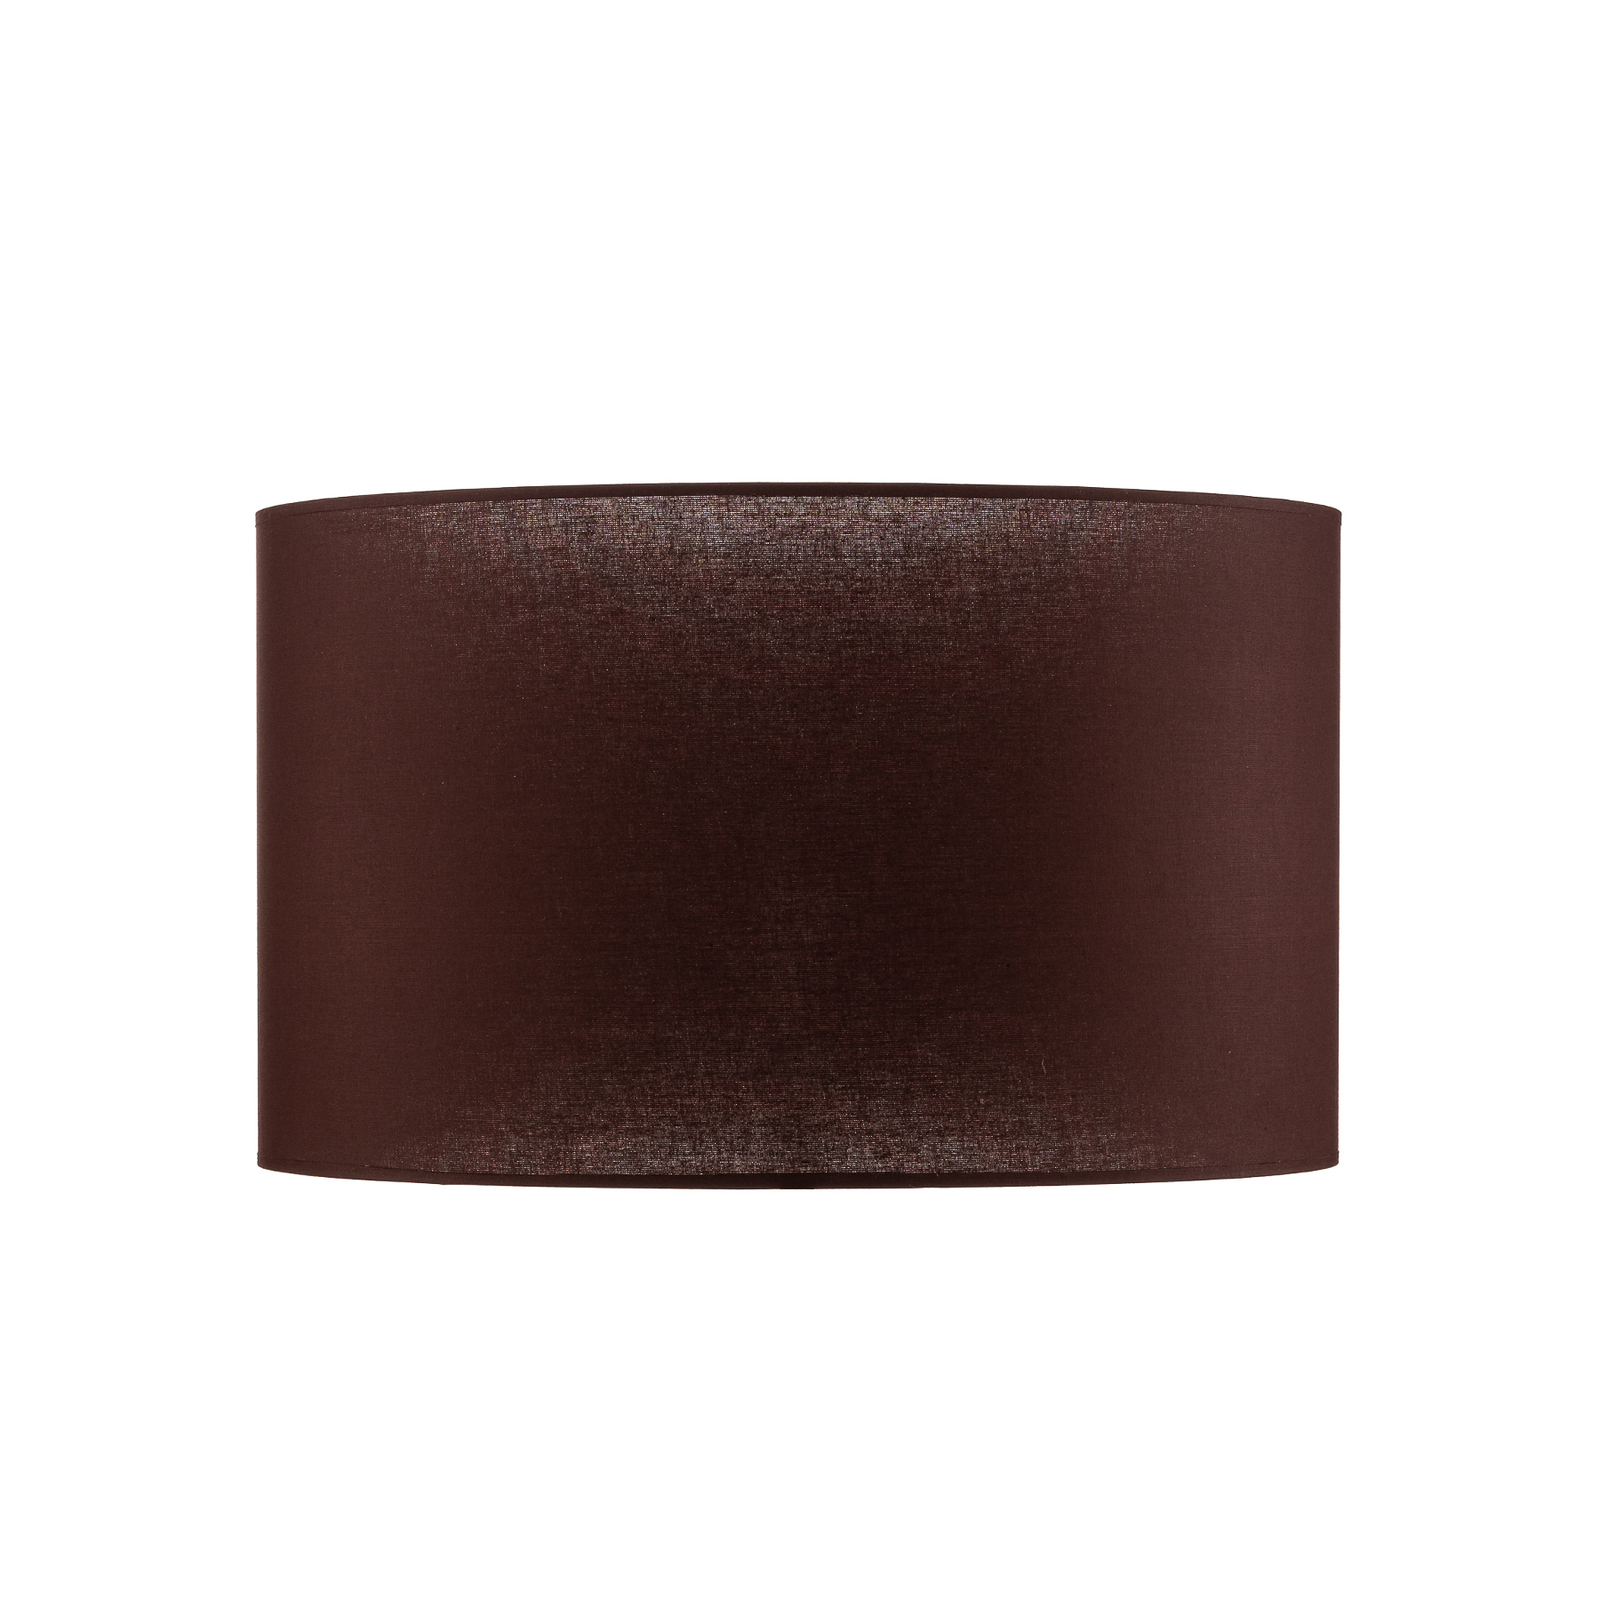 Roller lampshade, brown, Ø 50 cm, height 30 cm